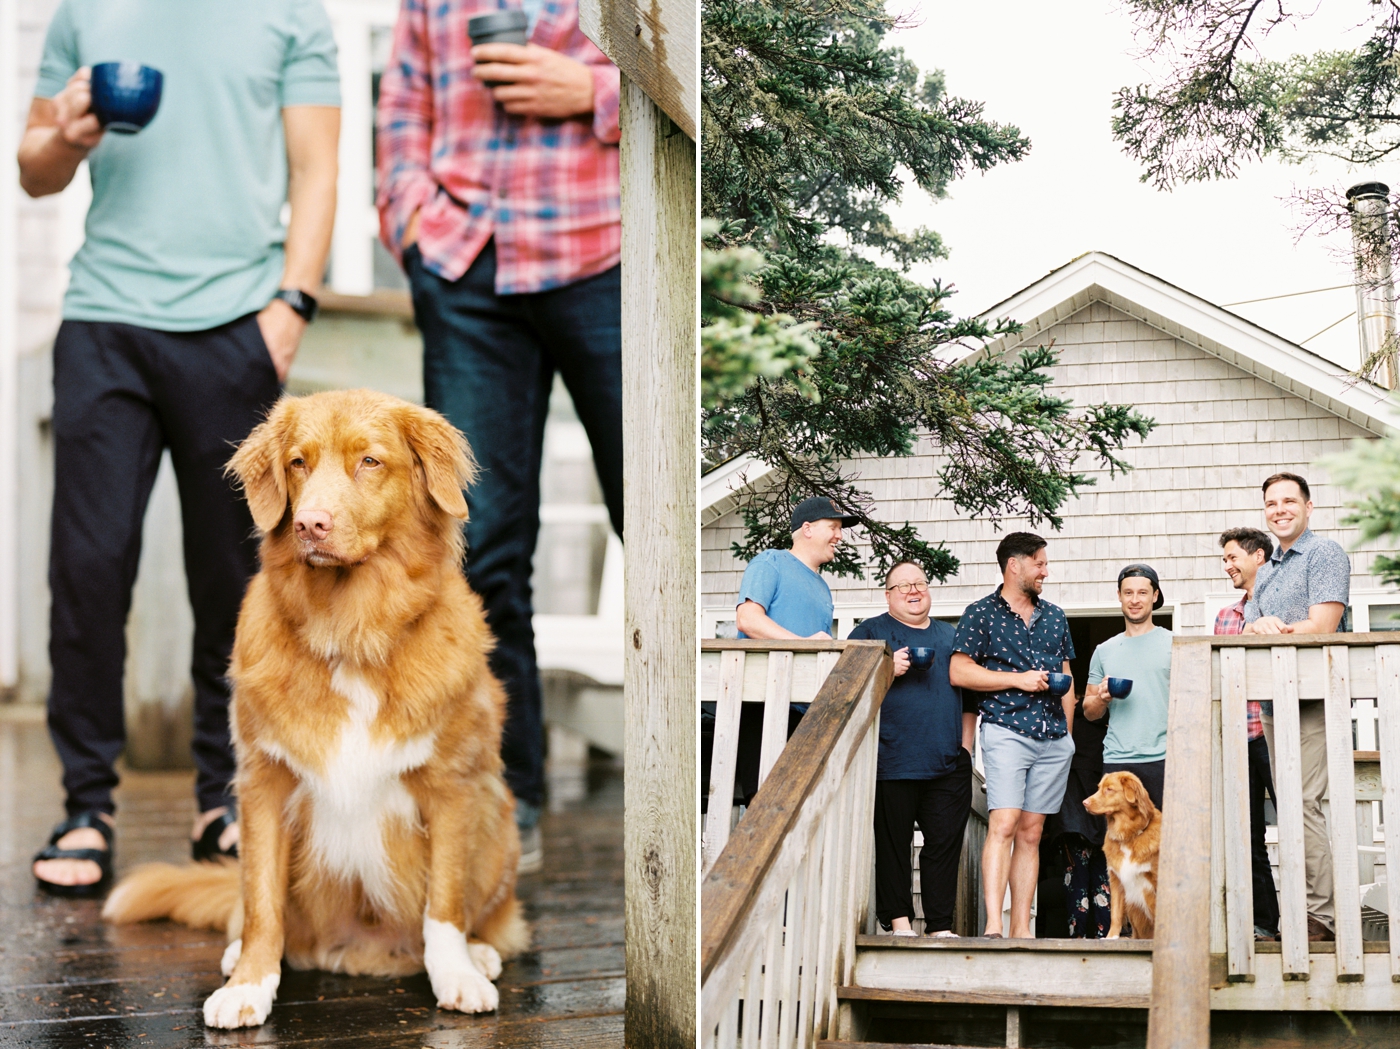 Groom drinking coffee with his groomsmen and his dog